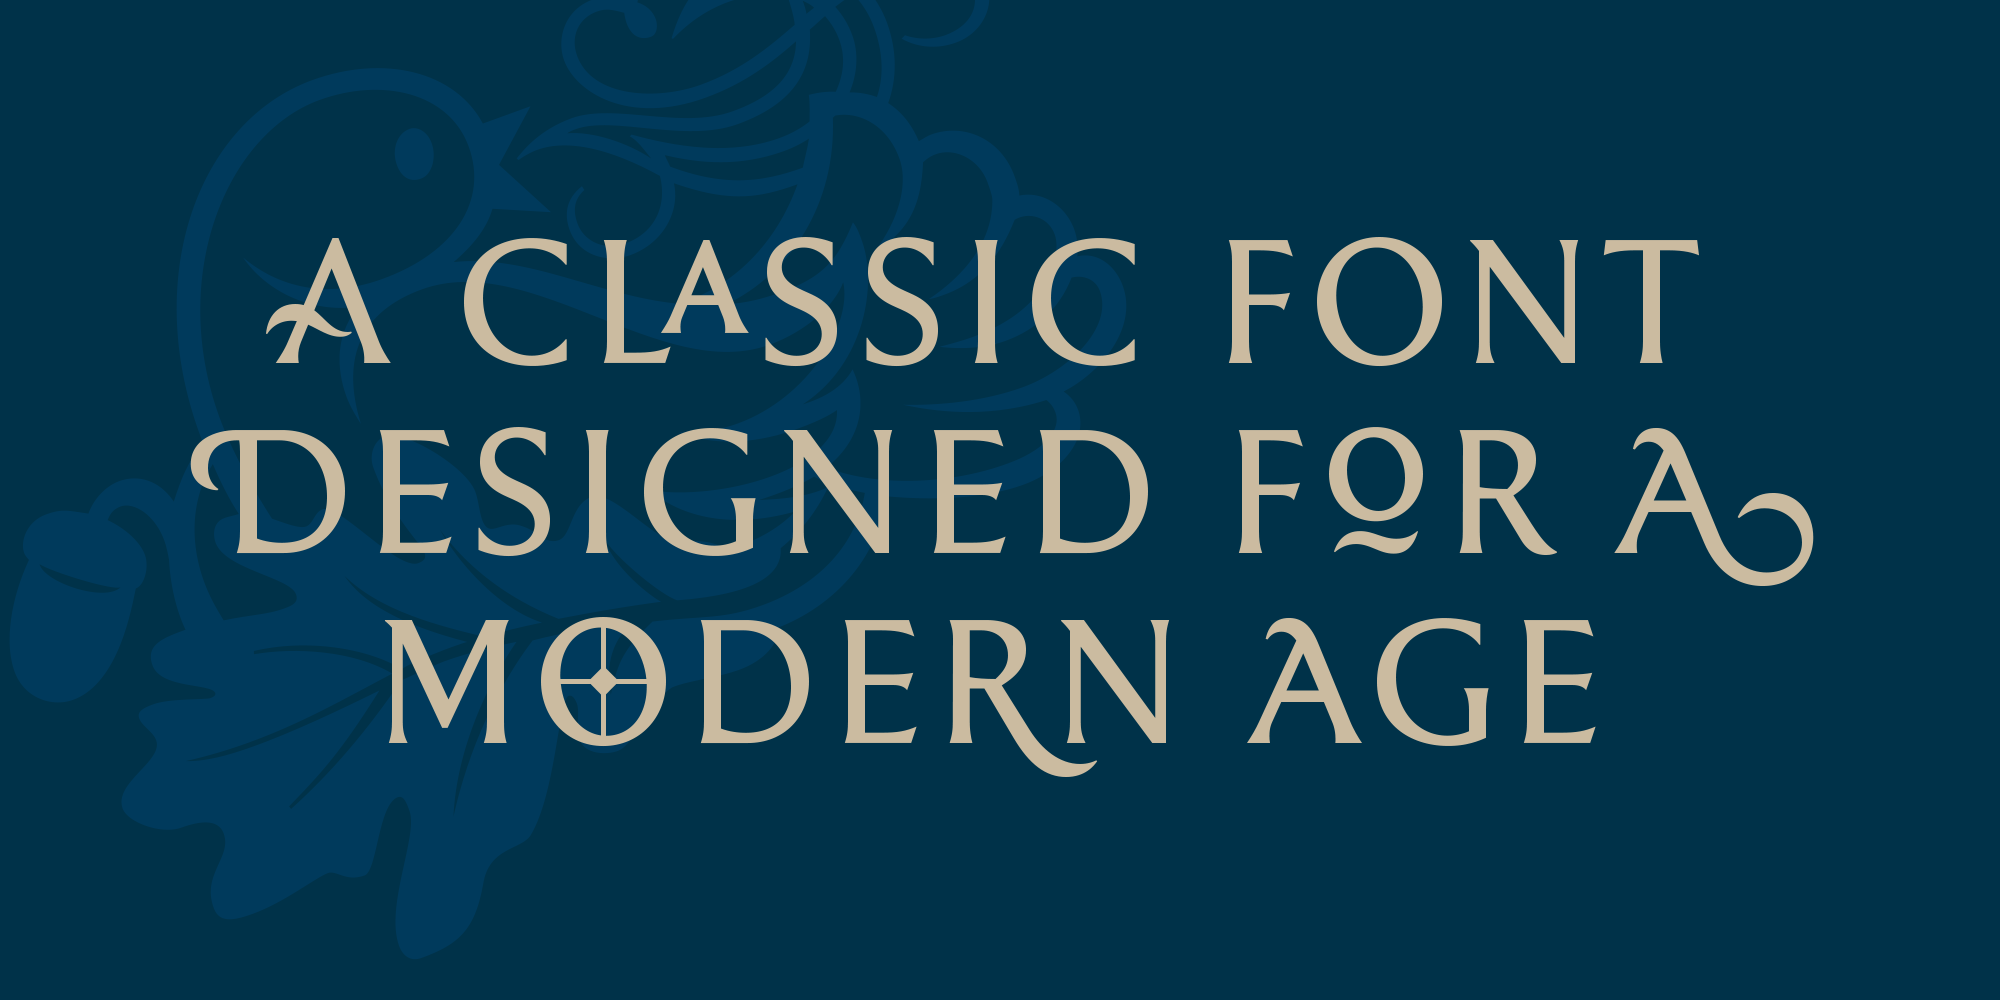 Rahere Roman Display, a classic font for a modern age